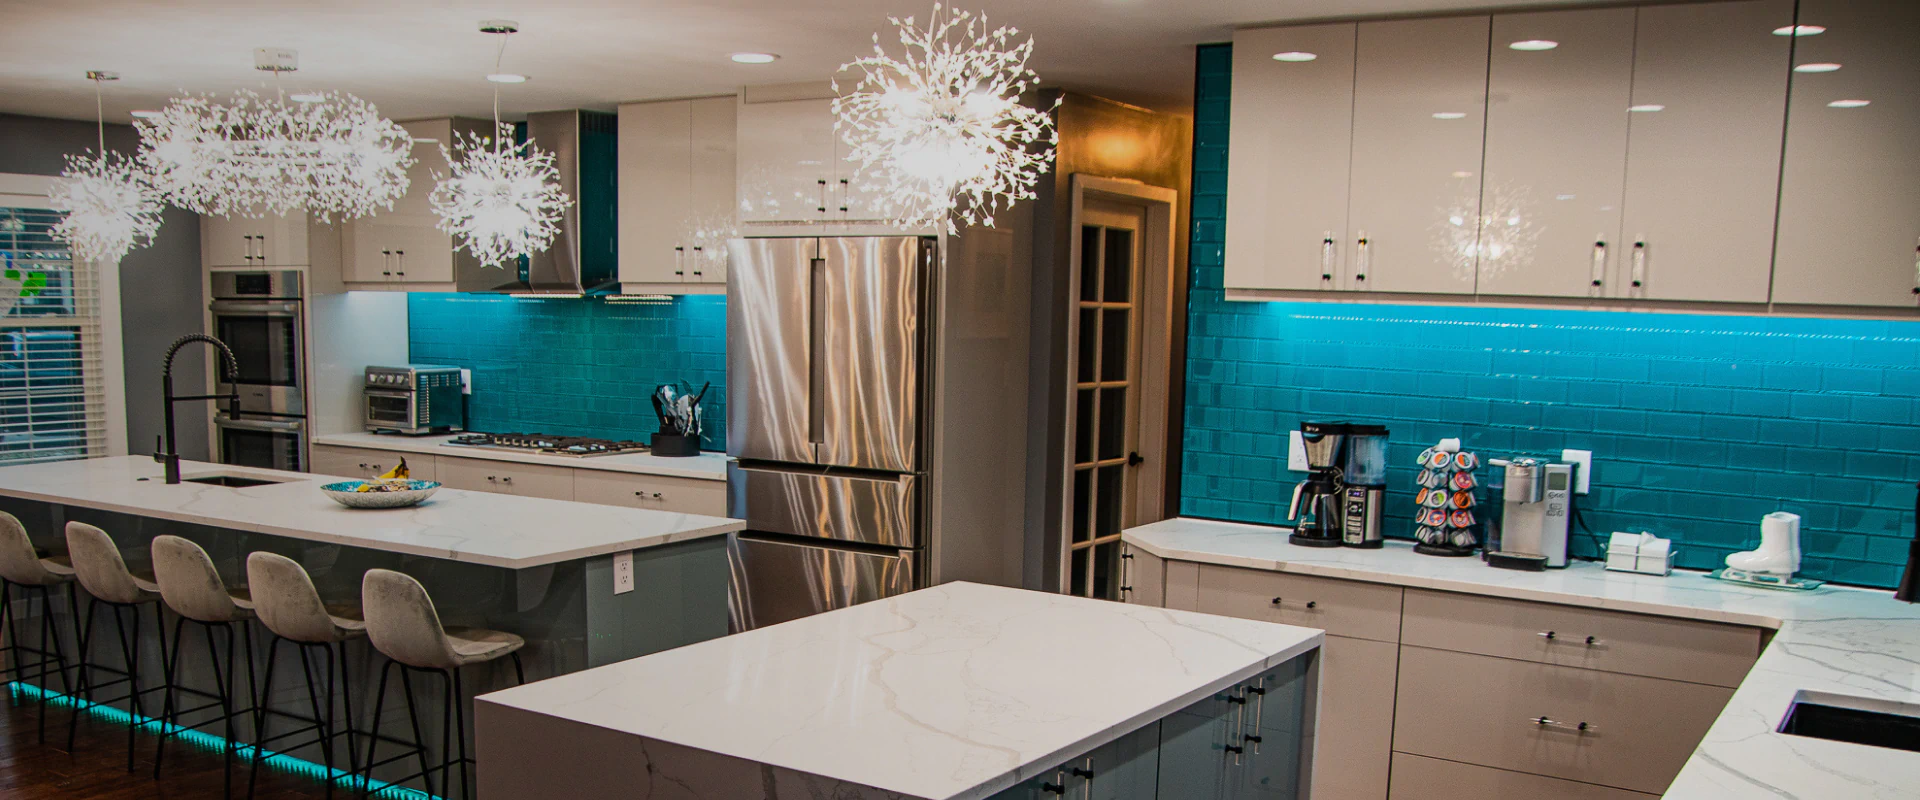 dowling kitchen remodeling with beautiful lighting and countertops williamston mi